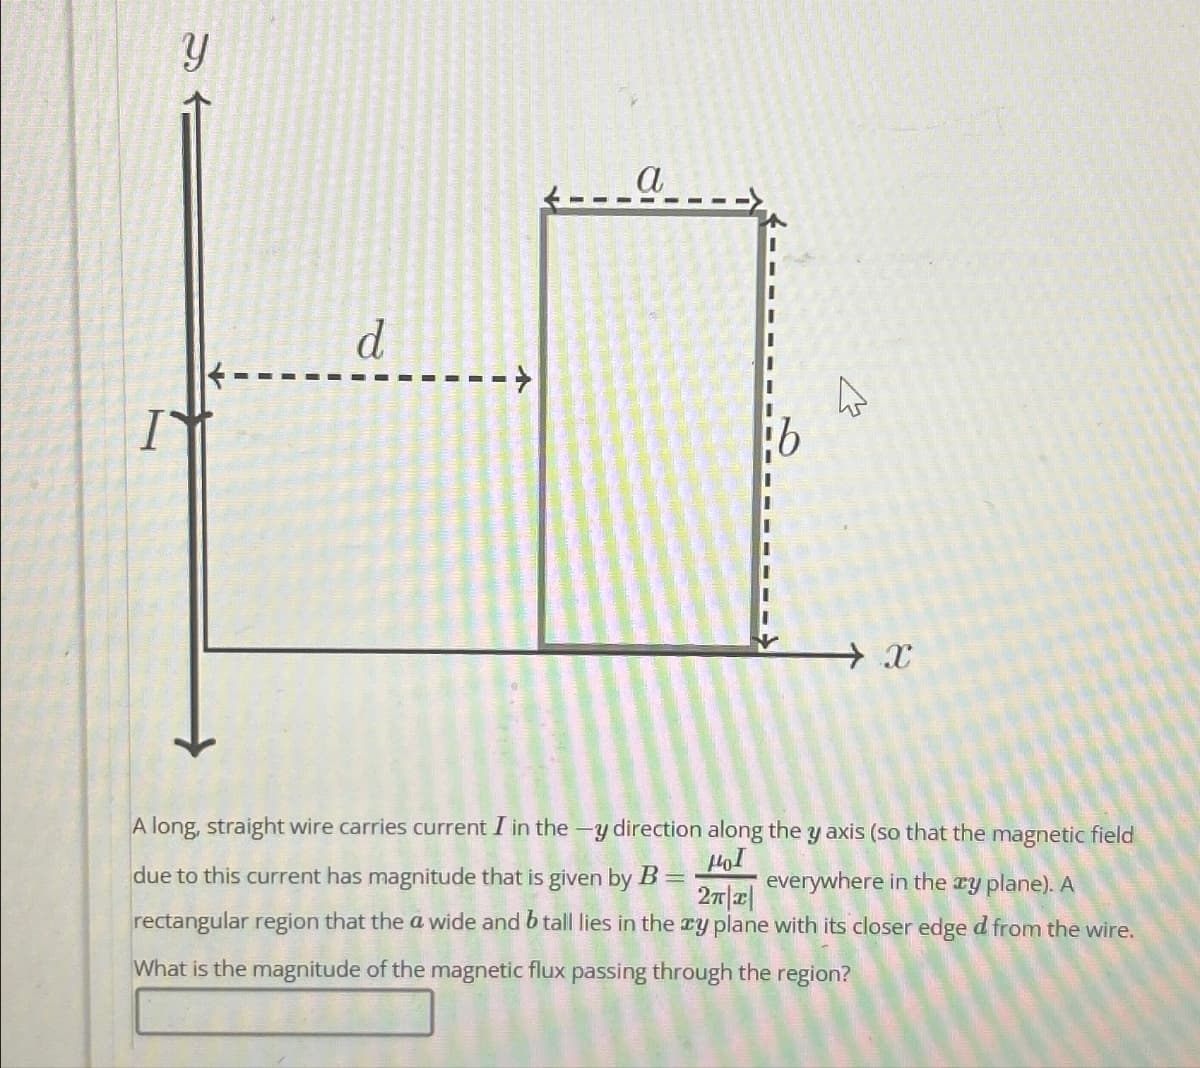 Y
I
d
a
13
X
A long, straight wire carries current I in the -y direction along the y axis (so that the magnetic field
due to this current has magnitude that is given by B =
HOI
2π|x|
everywhere in the xy plane). A
rectangular region that the a wide and b tall lies in the xy plane with its closer edge d from the wire.
What is the magnitude of the magnetic flux passing through the region?